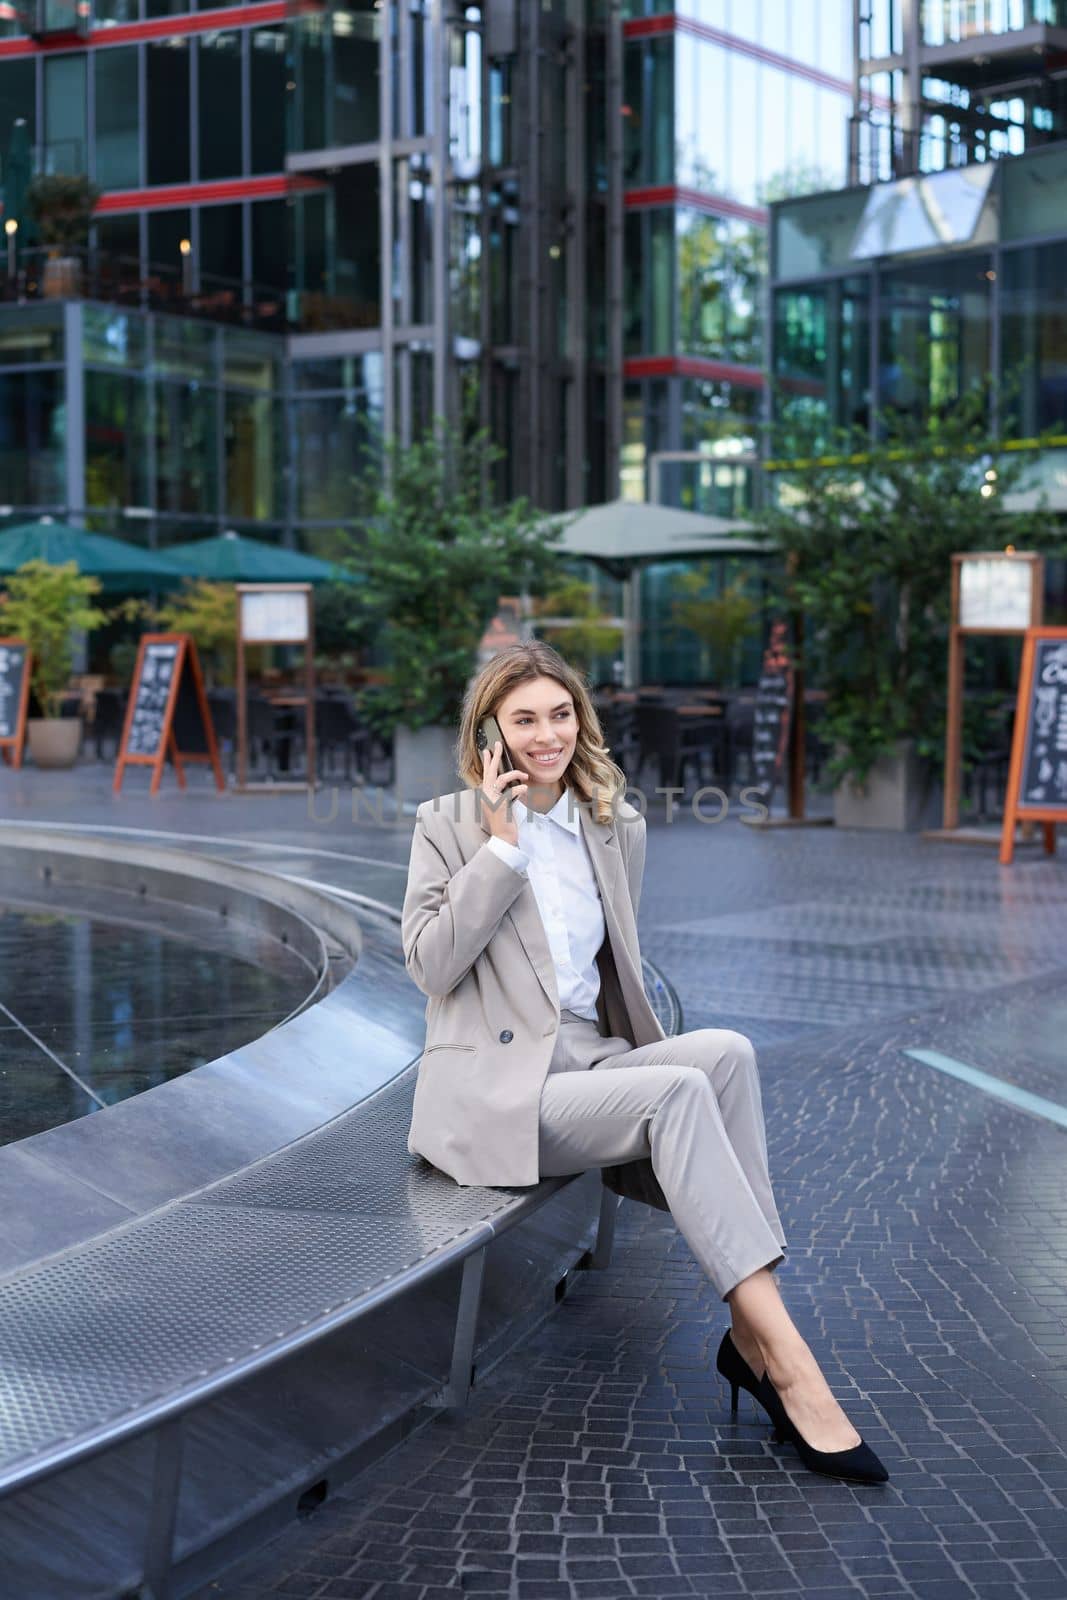 Vertical shot of young businesswoman in suit, sitting casually outside office buldings, talking on smartphone, making a phone call and smiling.